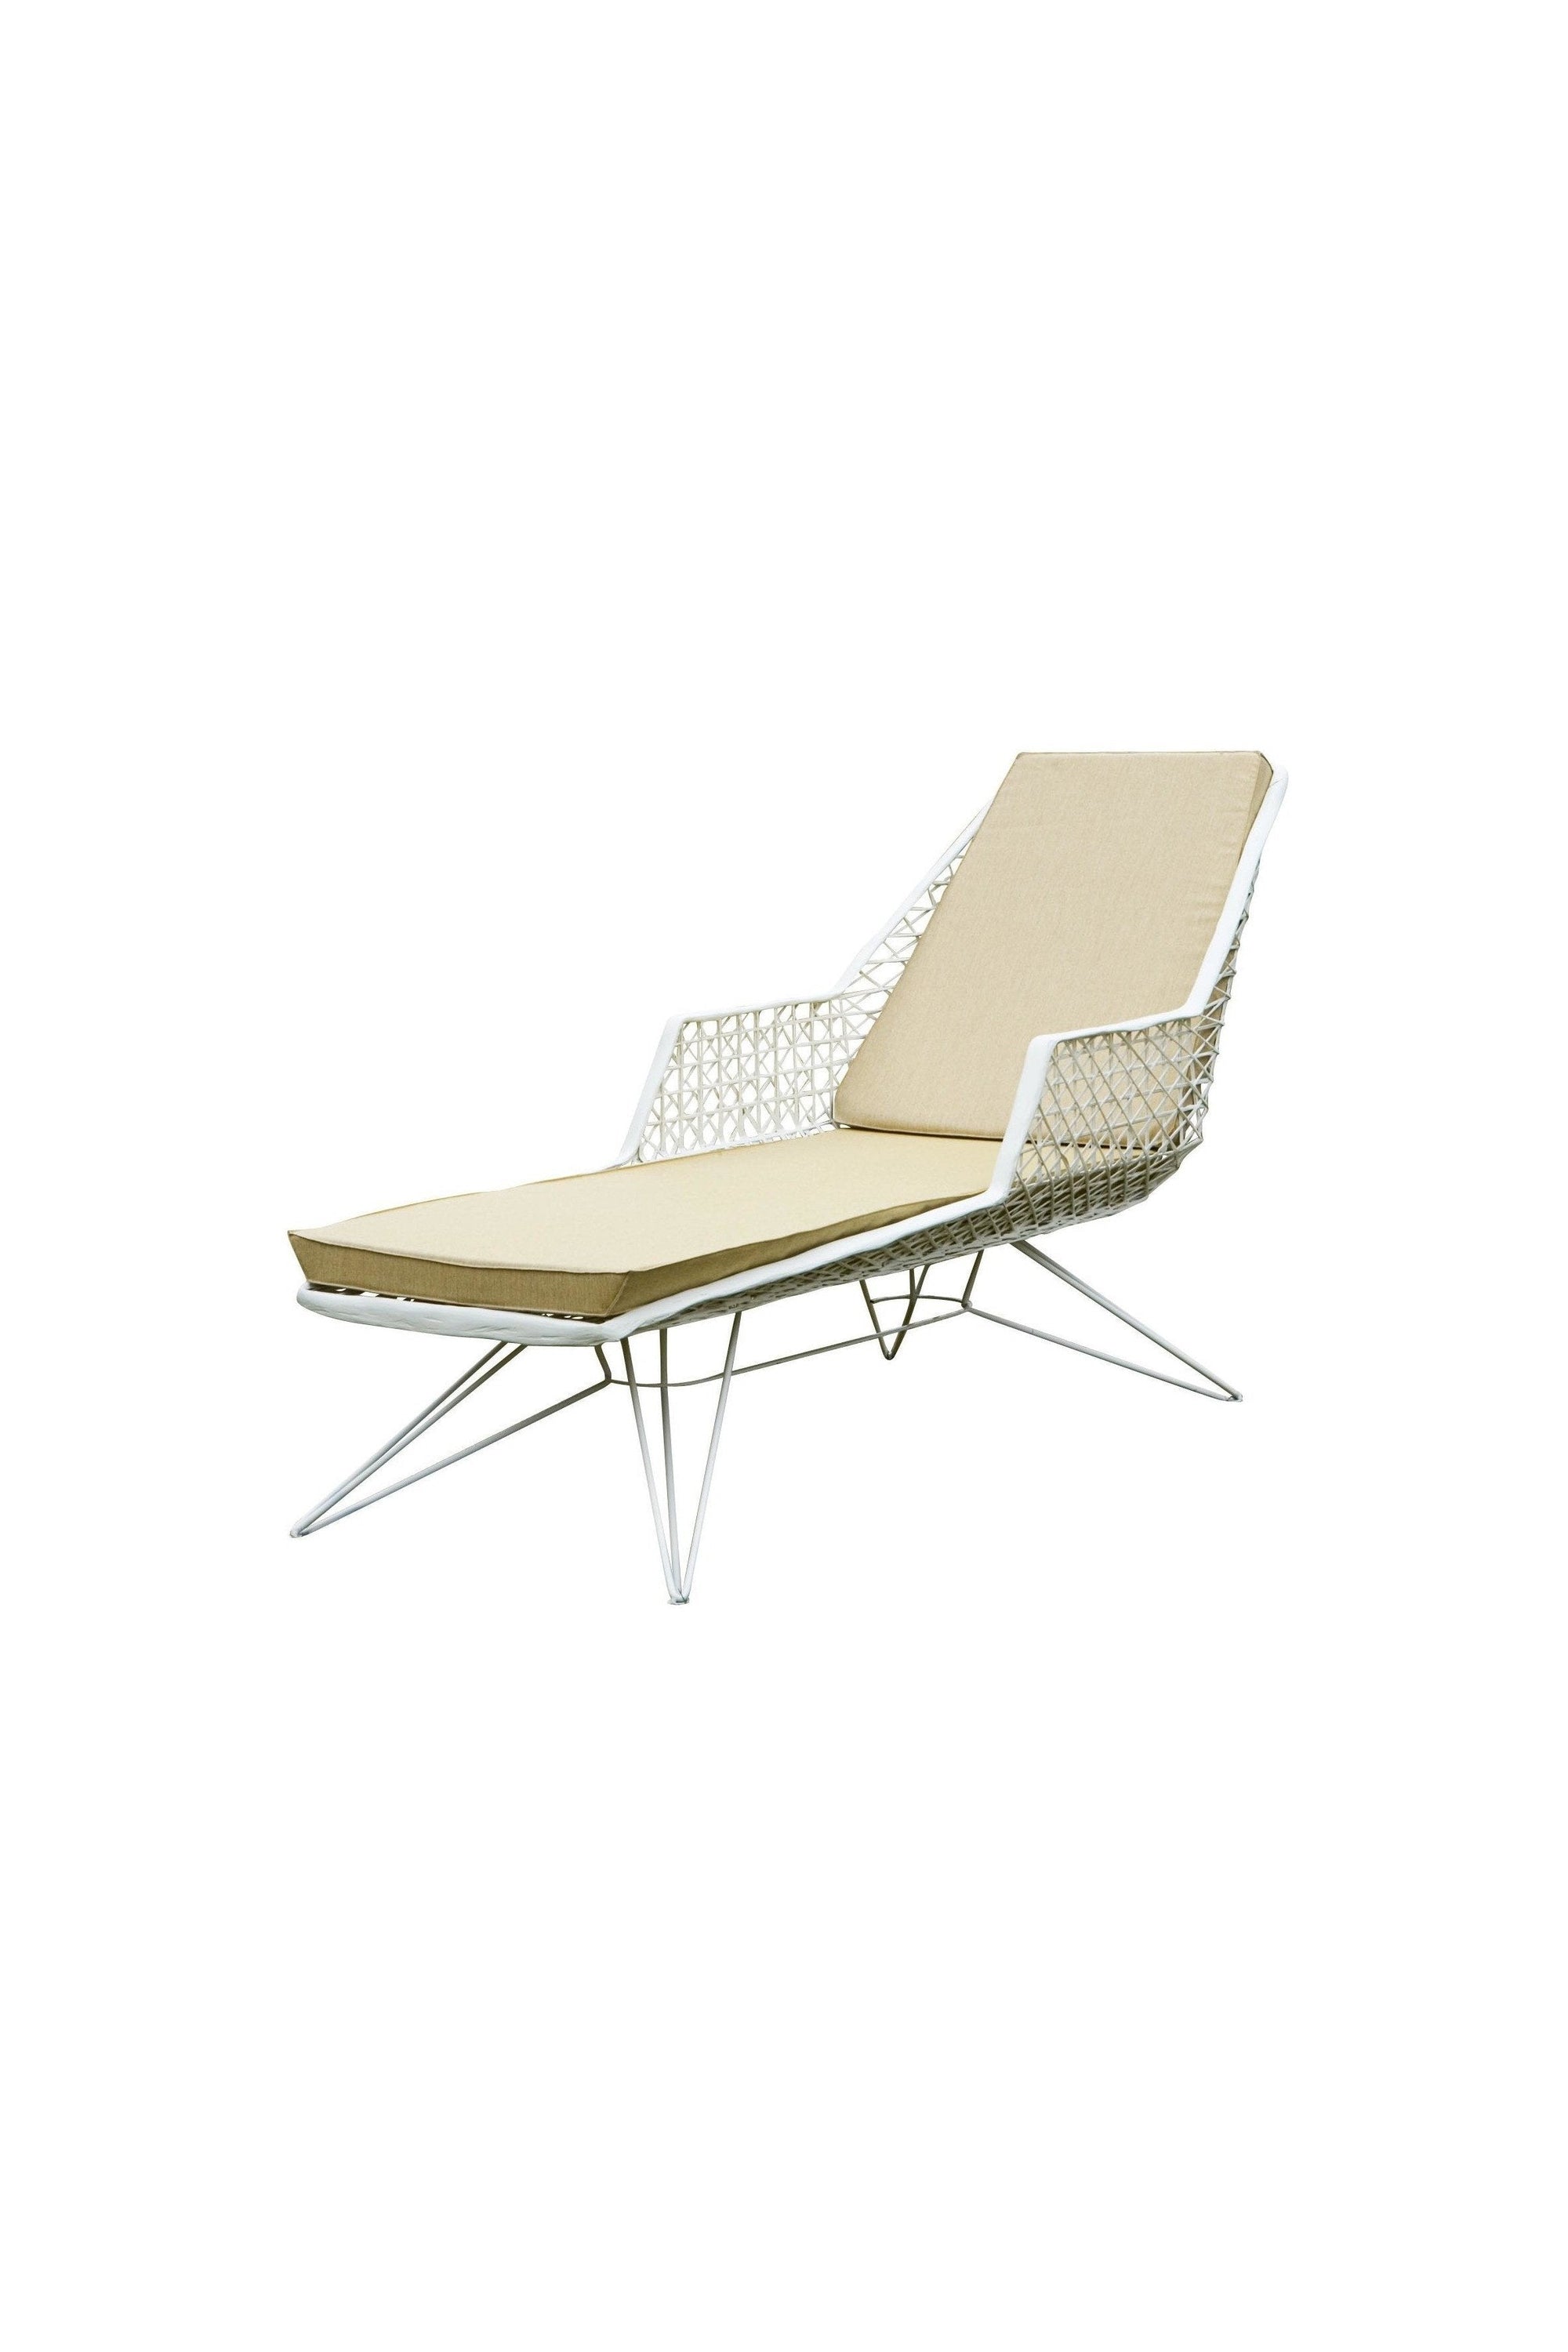 Anti-C 108 Lounger-Lobster's Day-Contract Furniture Store